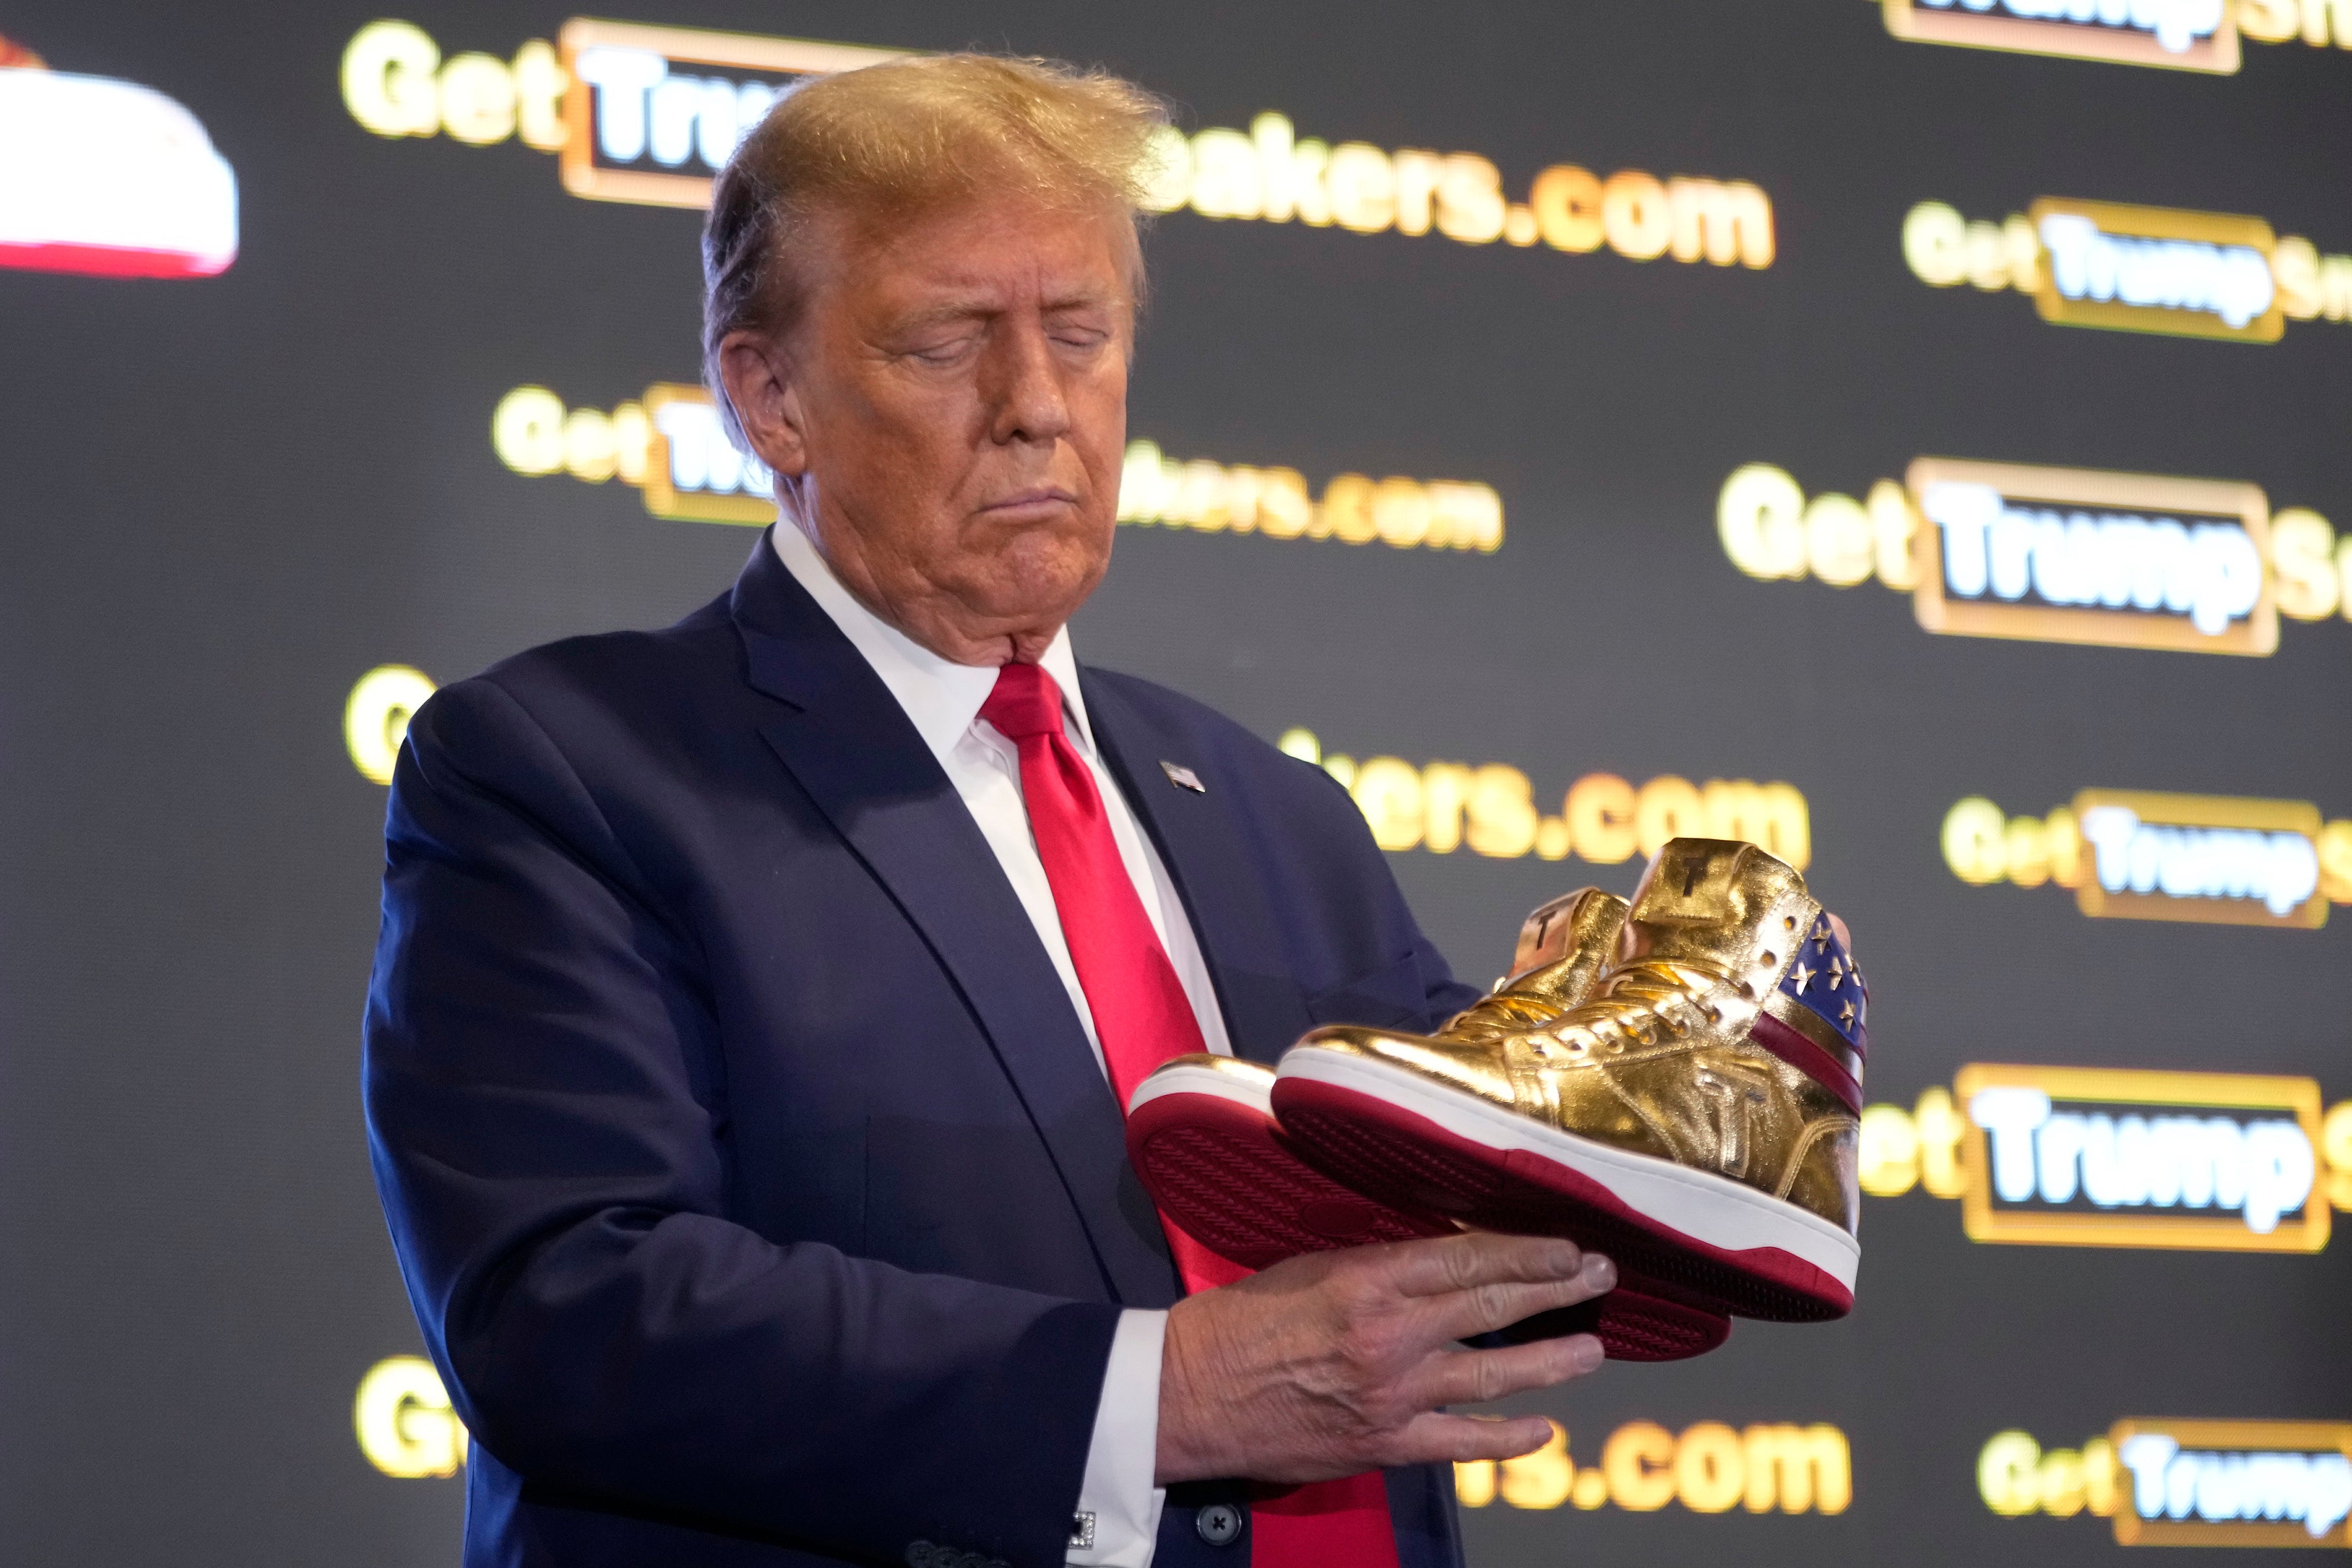 donald trump’s sneakers: everything we know about the $399 ‘never surrender’ gold high-tops